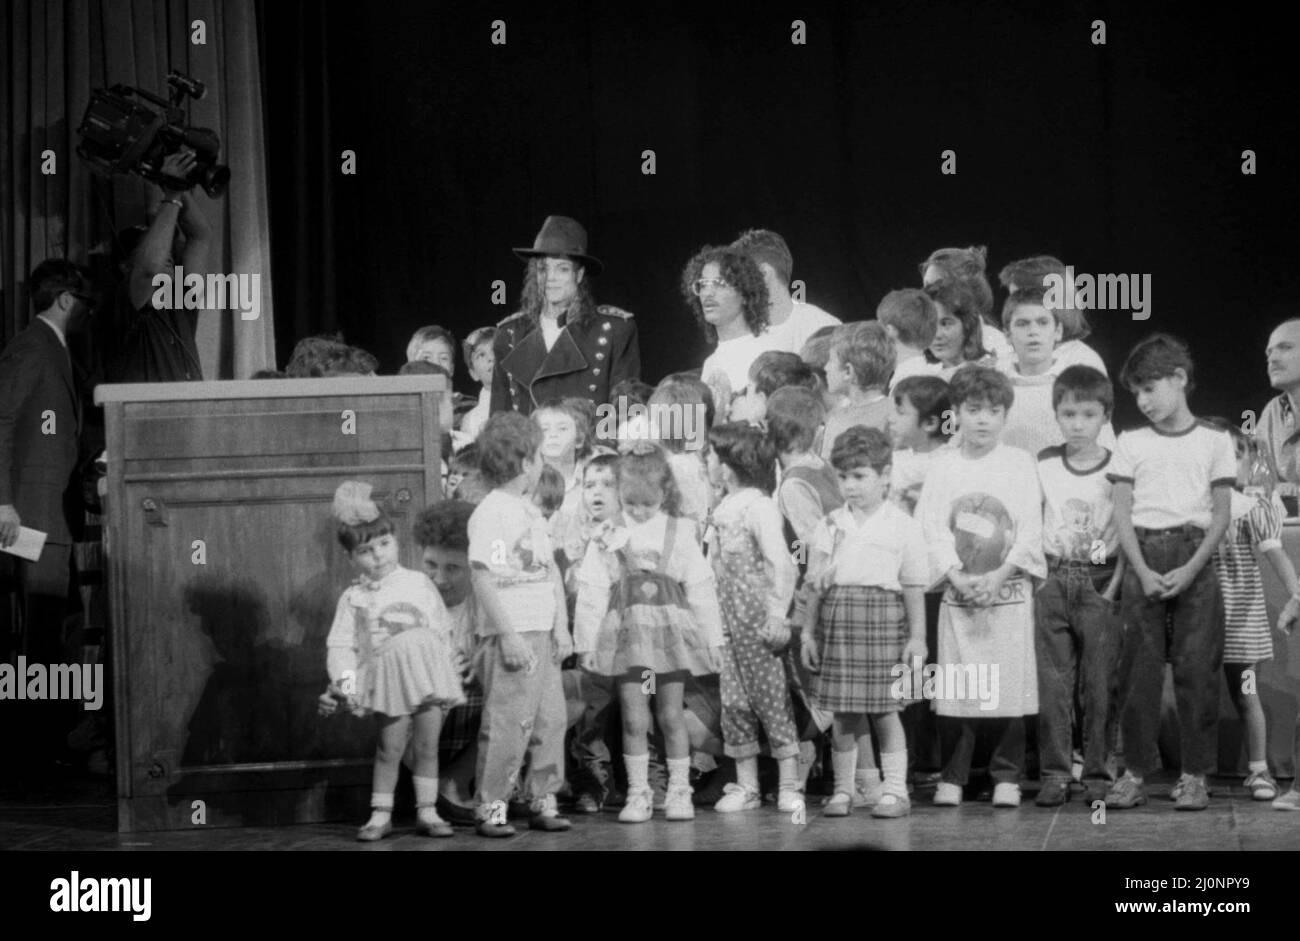 Bucharest, Romania, 1990. American artist Michael Jackson with a group of children from a local orphanage. Stock Photo